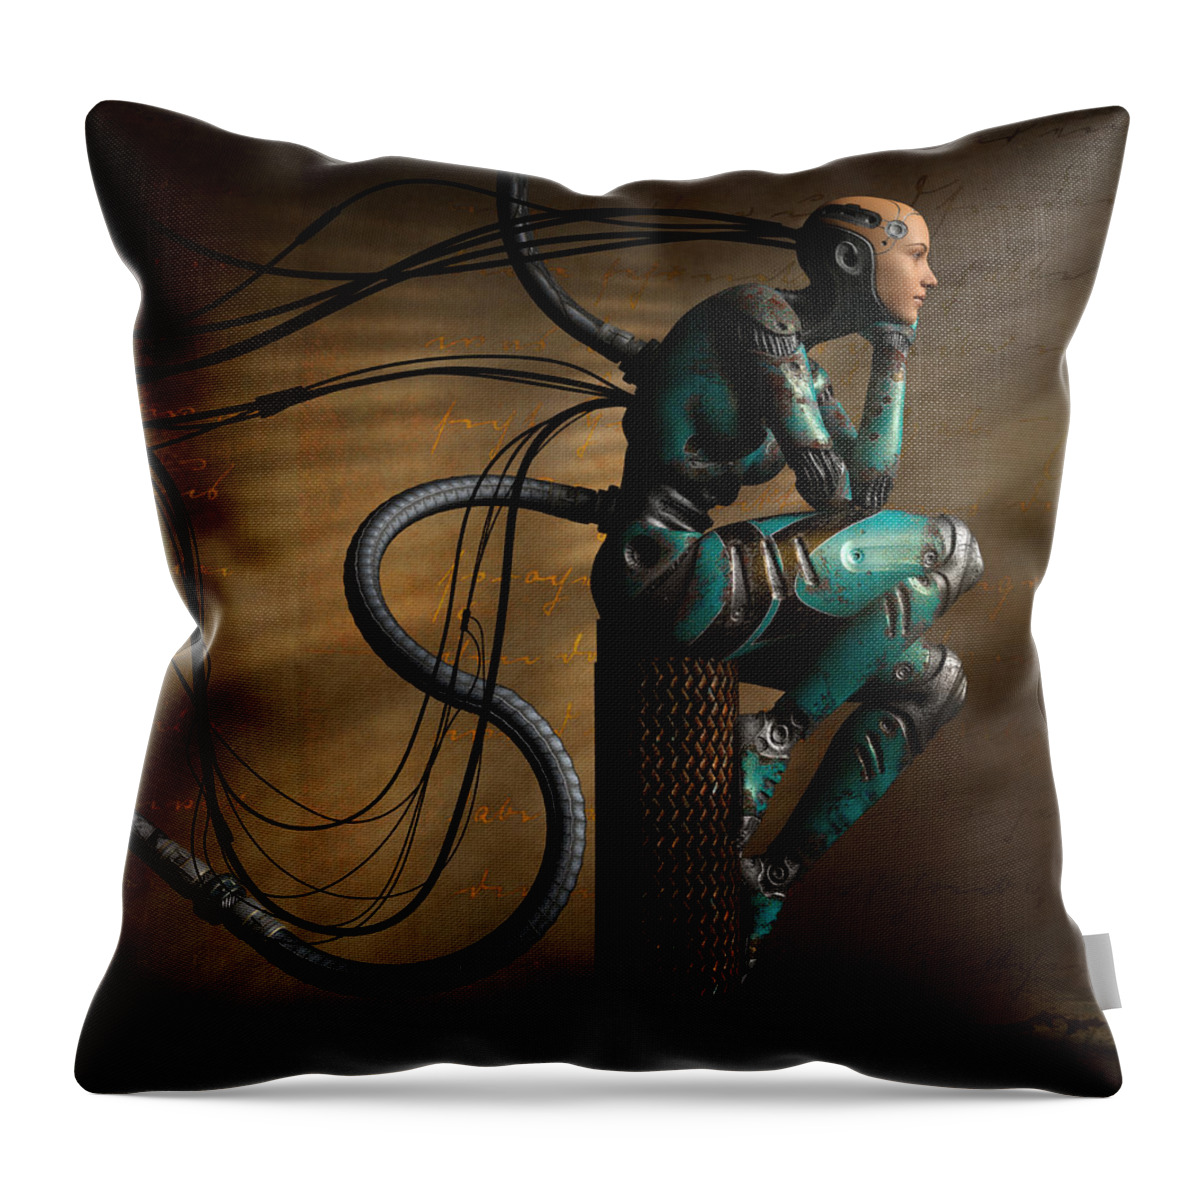 Dreaming Gold Aqua Robot Tubes Wires Shadows Light Throw Pillow featuring the digital art Dreaming #1 by Alisa Williams